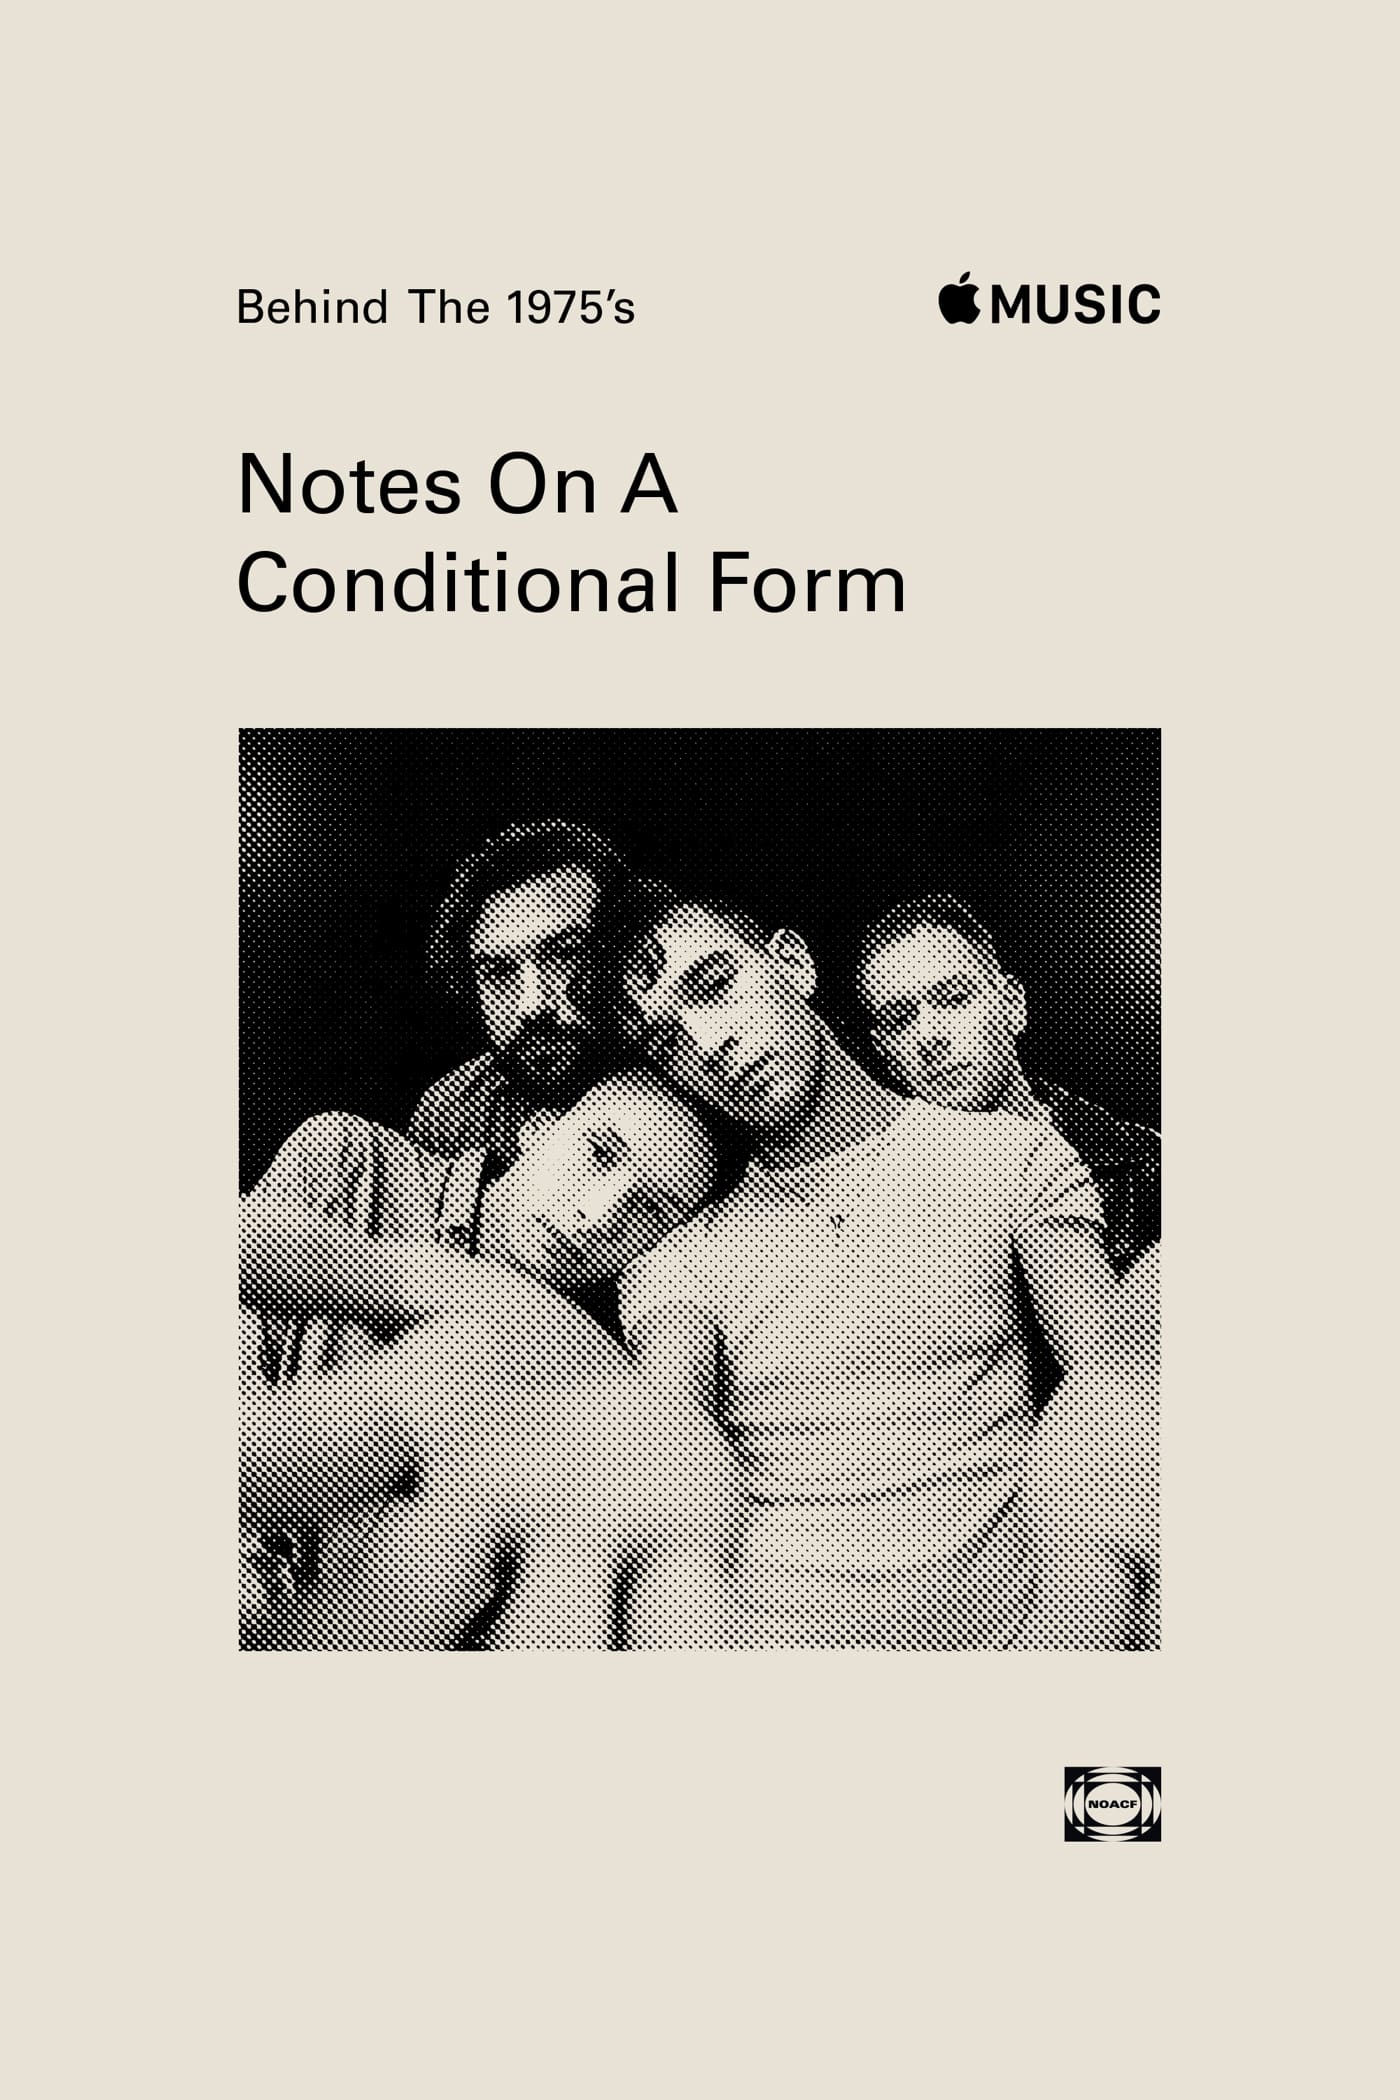 Behind The 1975’s 'Notes on a Conditional Form'